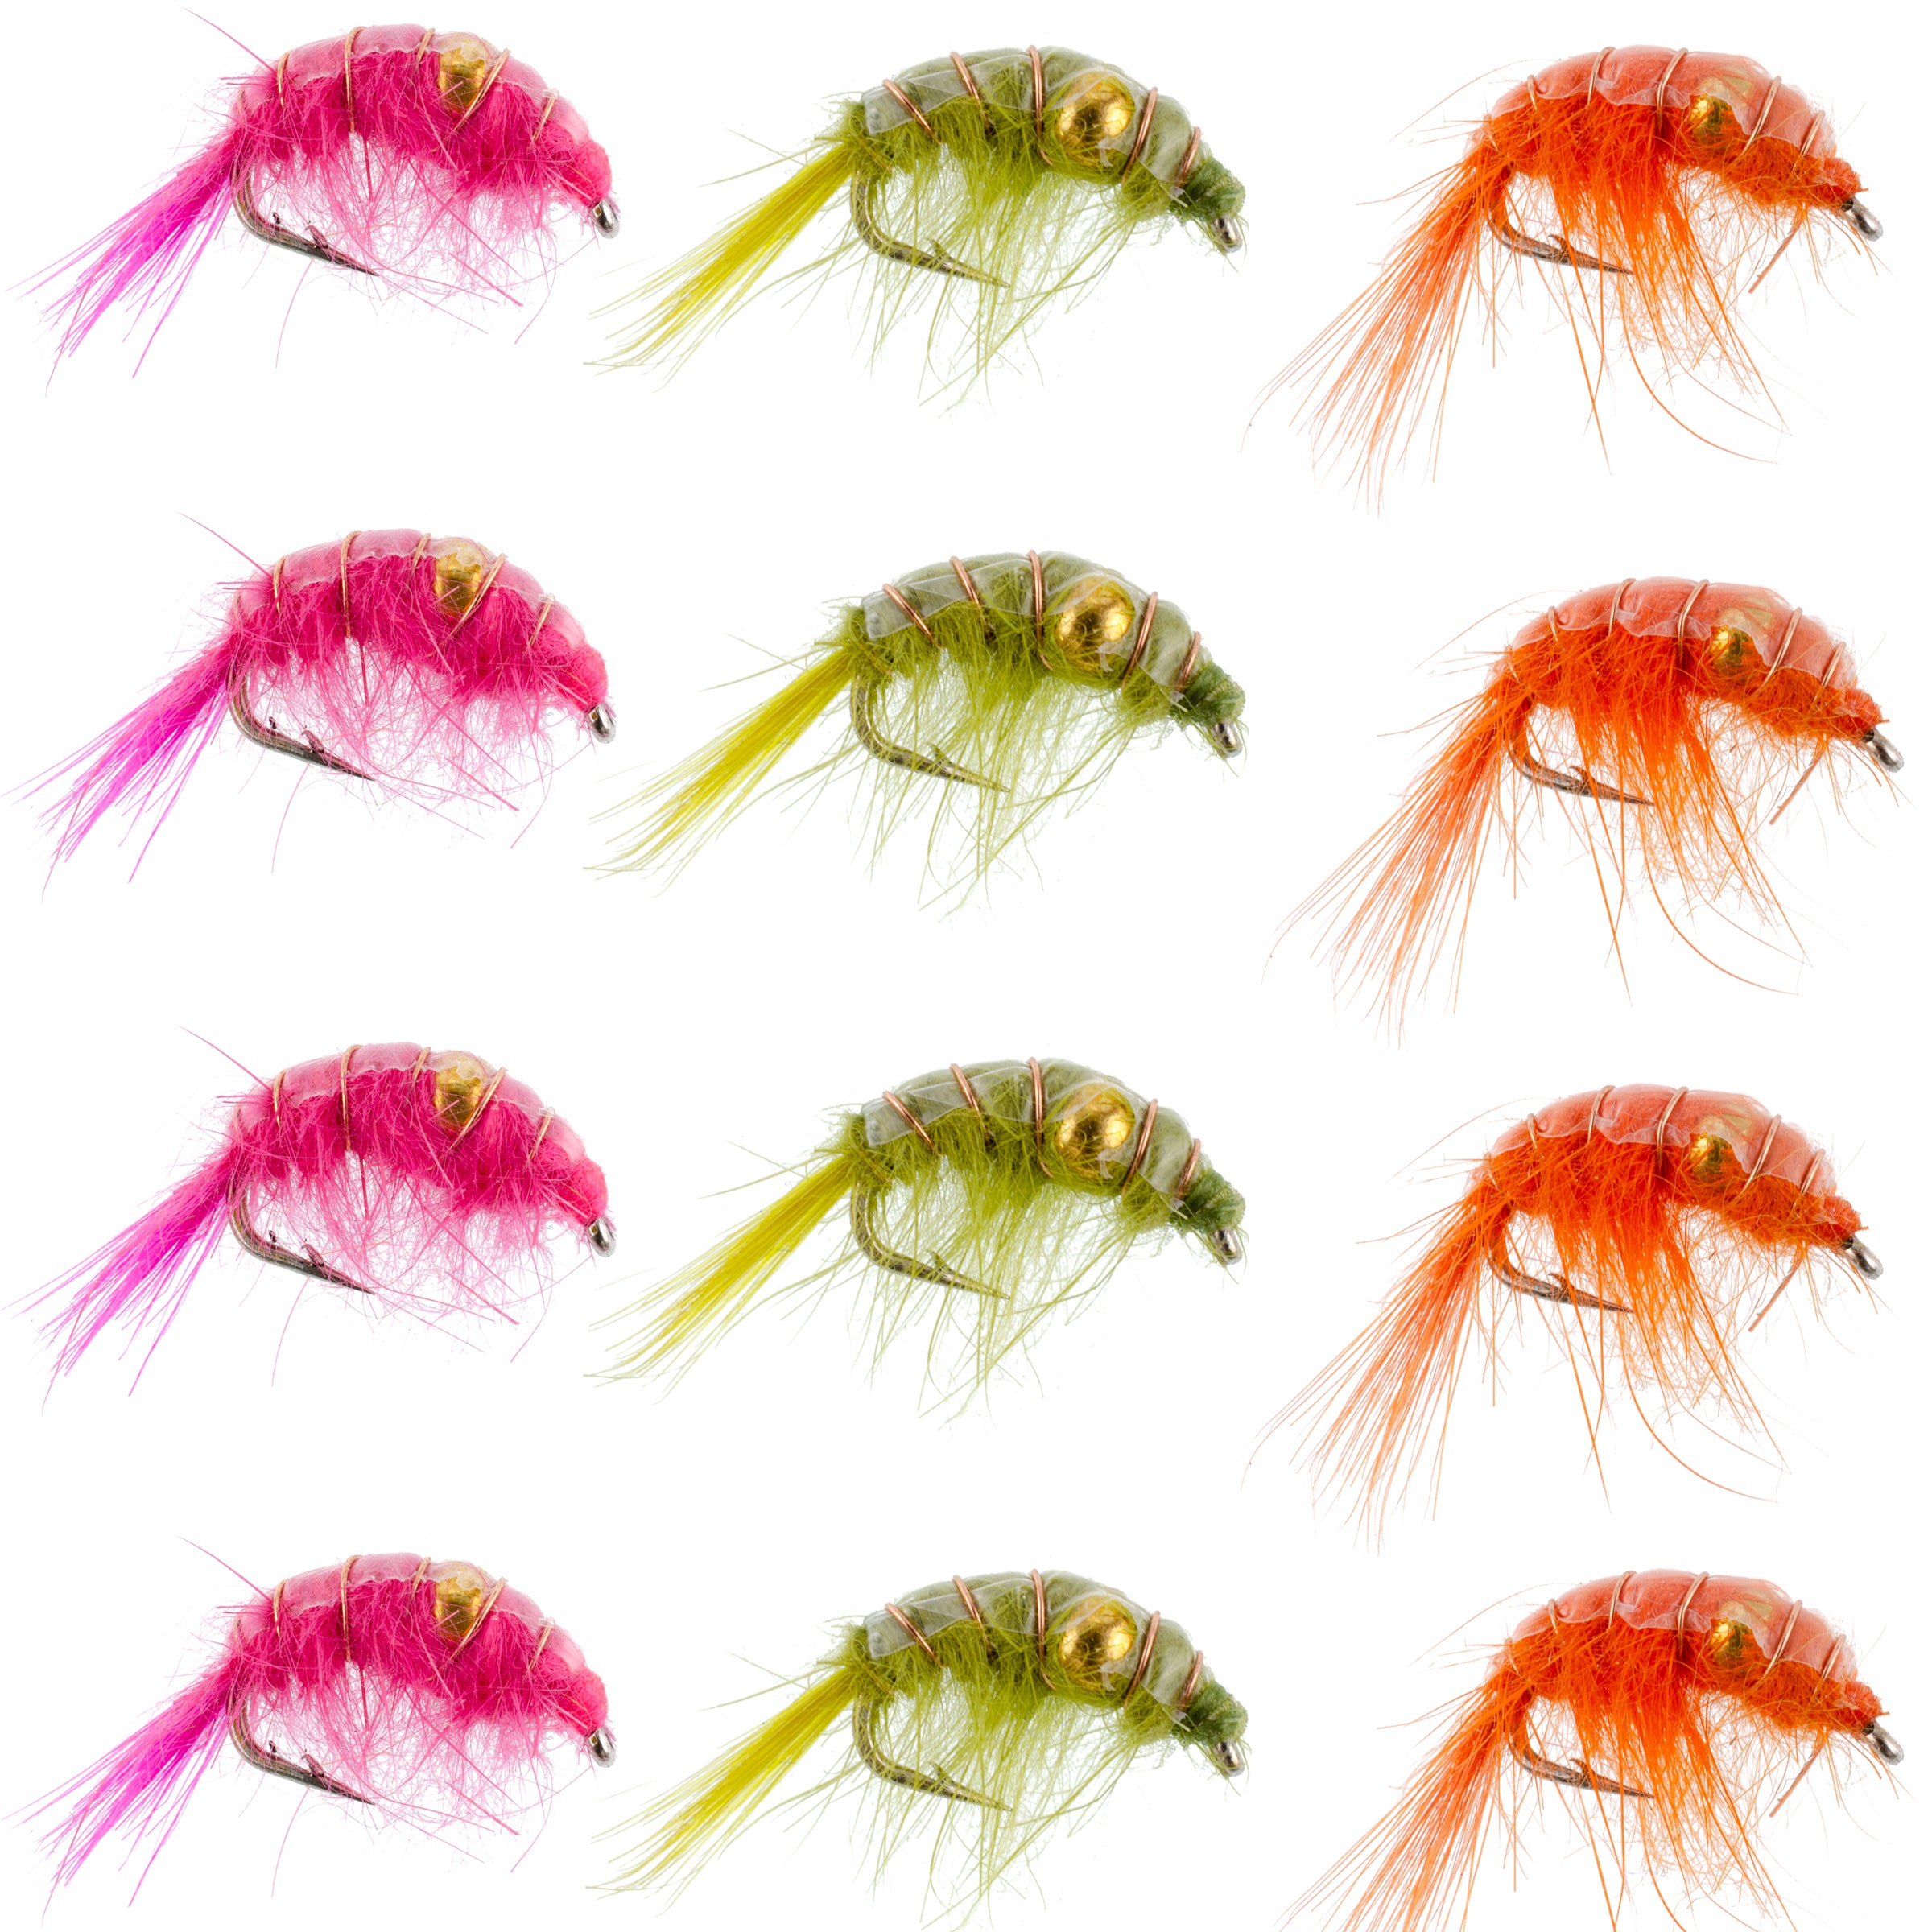 Beaded Shrimp Scud Assortment - 1 Dozen - 4 Each of 3 Patterns Size 12 - Tailwater Lake Fly Fishing Flies Collection